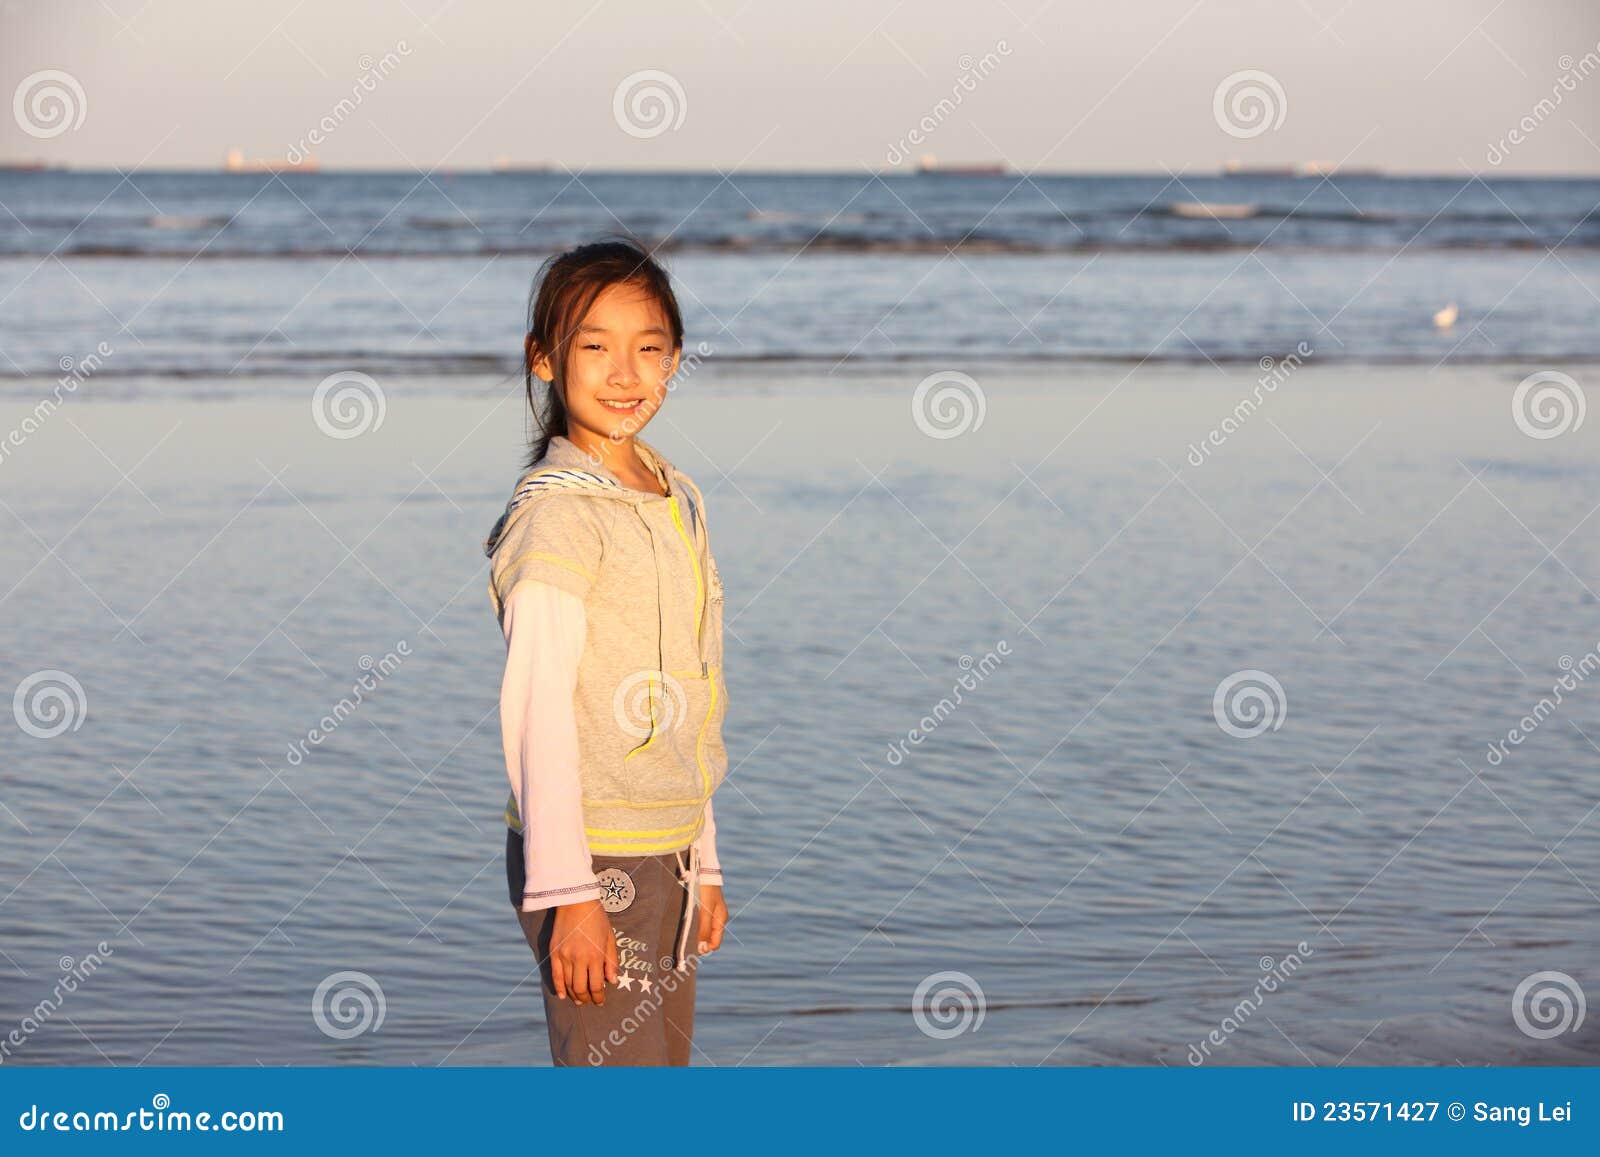 Chinese girl on the beach stock image. Image of little - 23571427